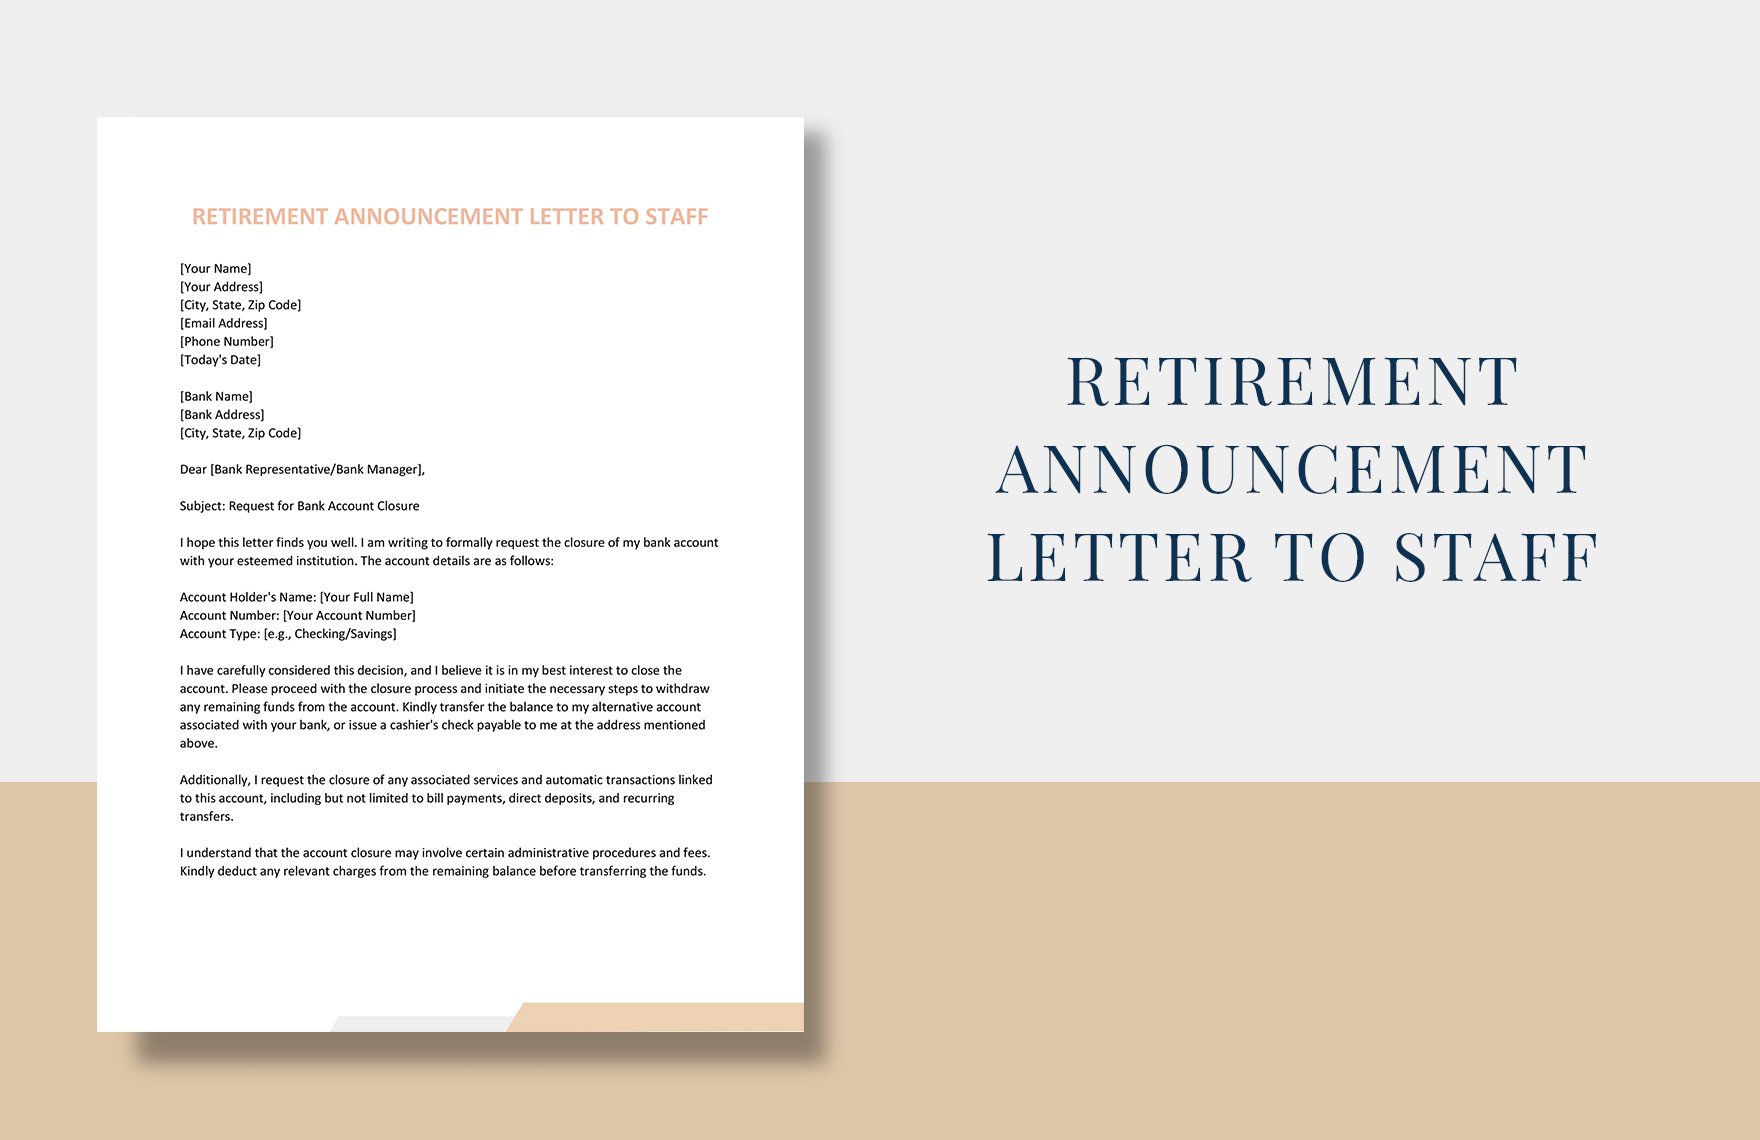 Retirement Announcement Letter to Staff